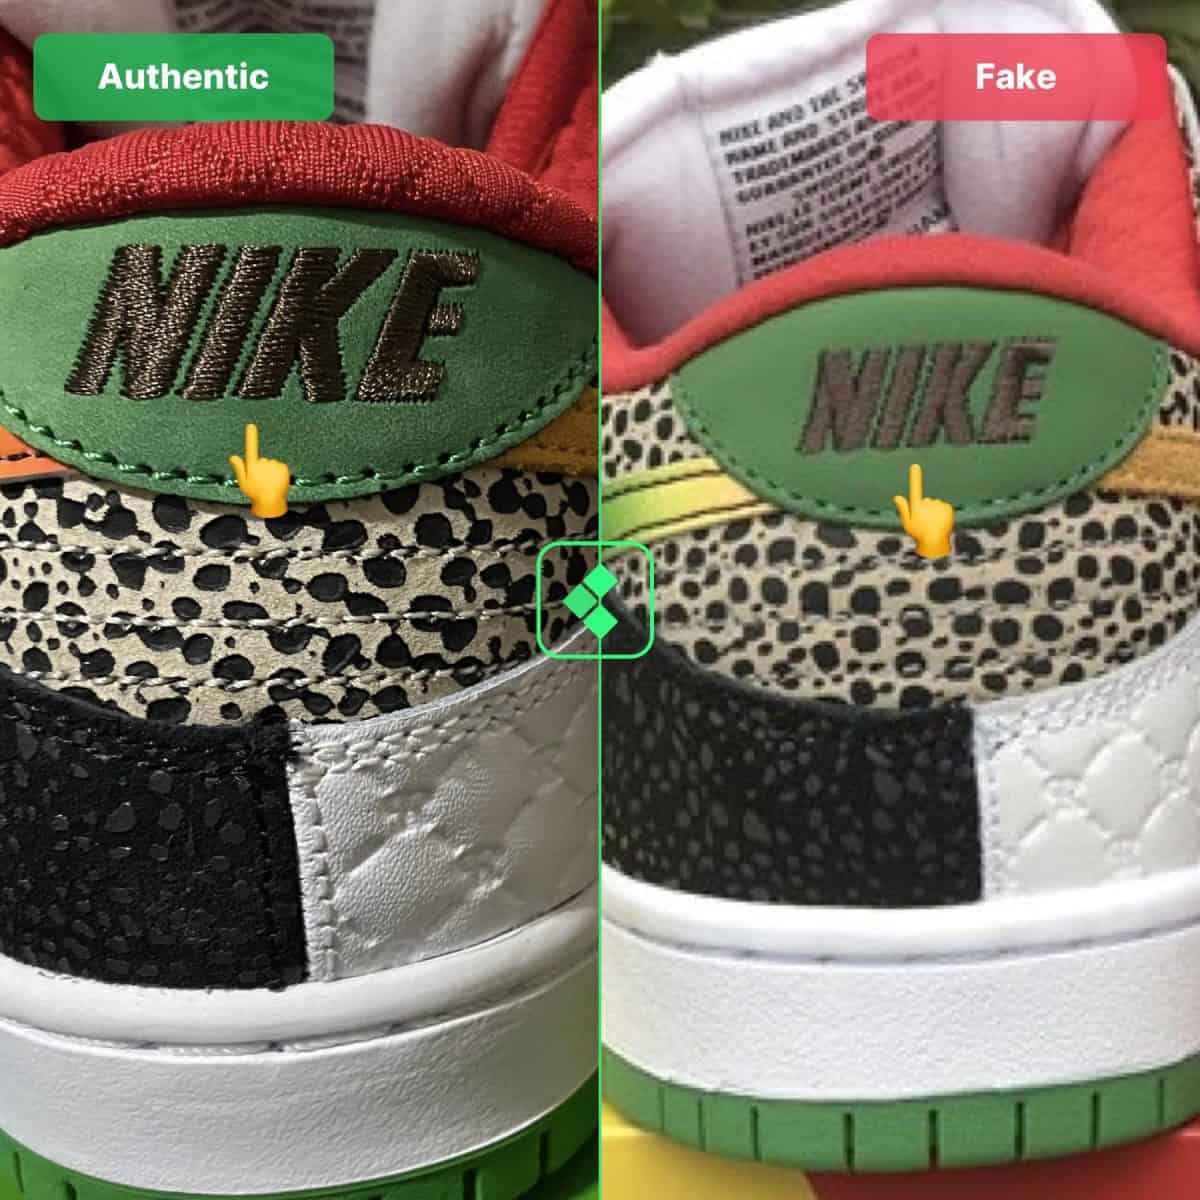 how to spot fake what the p-rod dunks